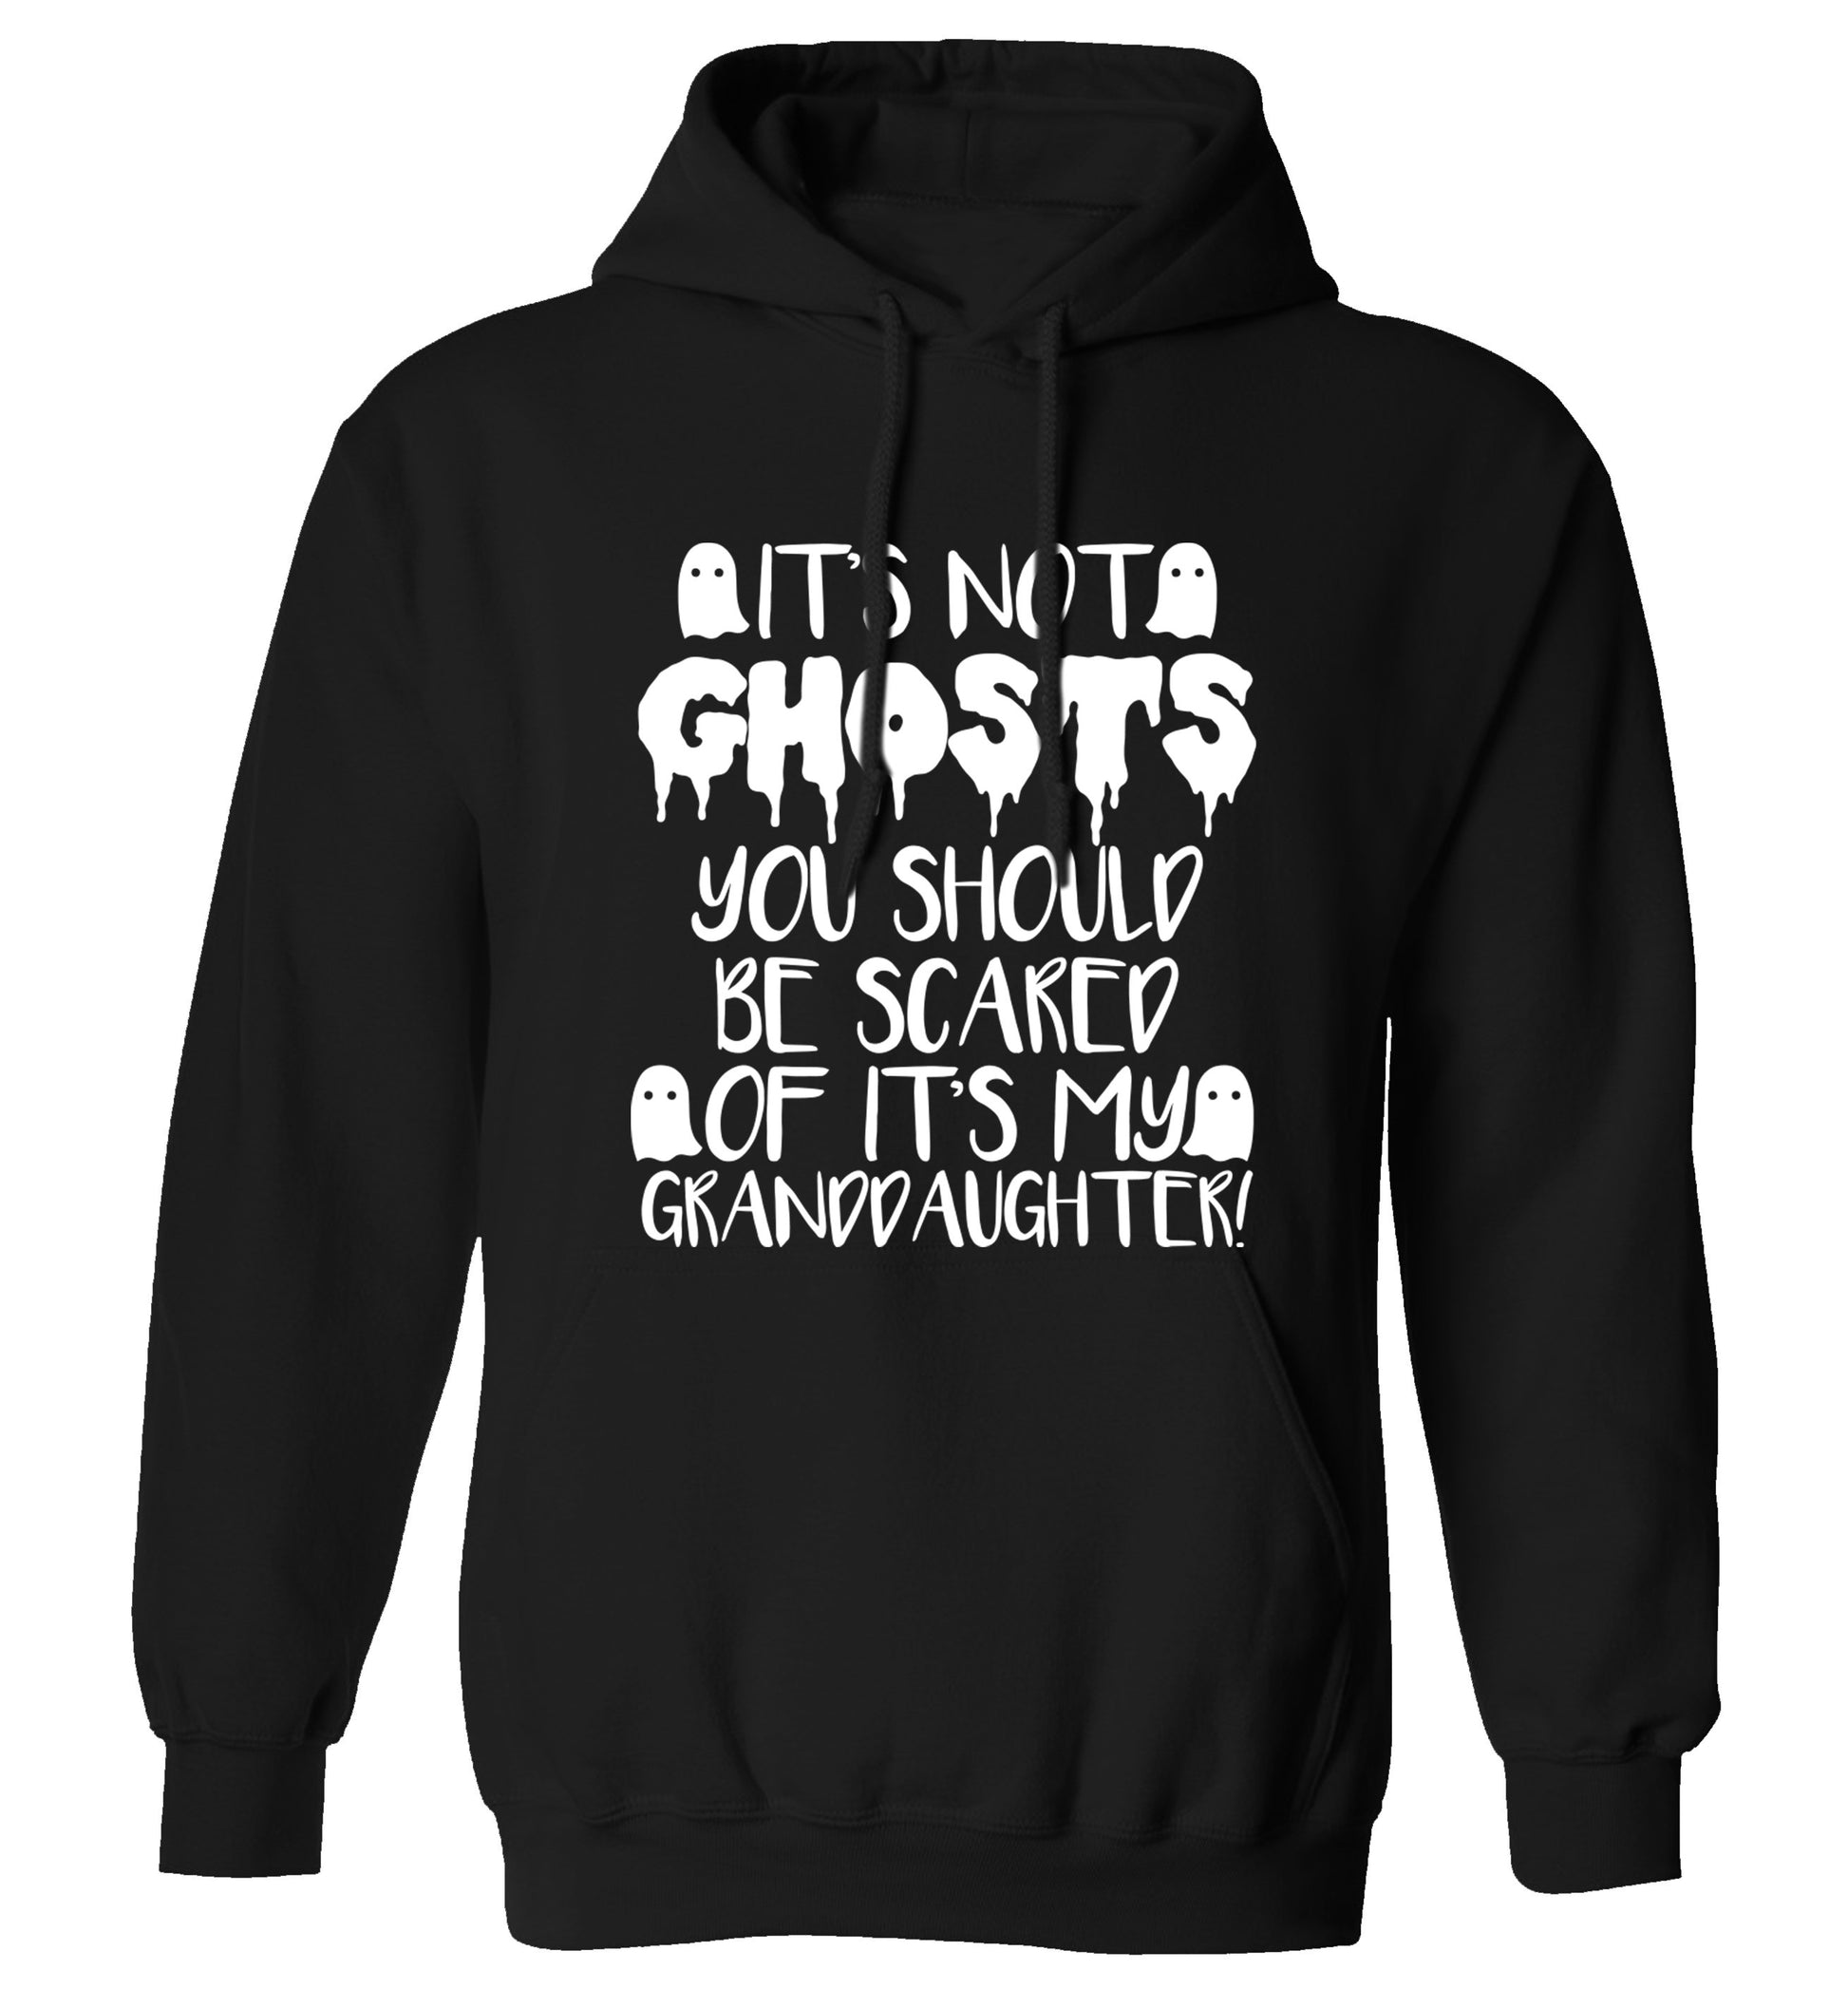 It's not ghosts you should be scared of it's my granddaughter! adults unisex black hoodie 2XL